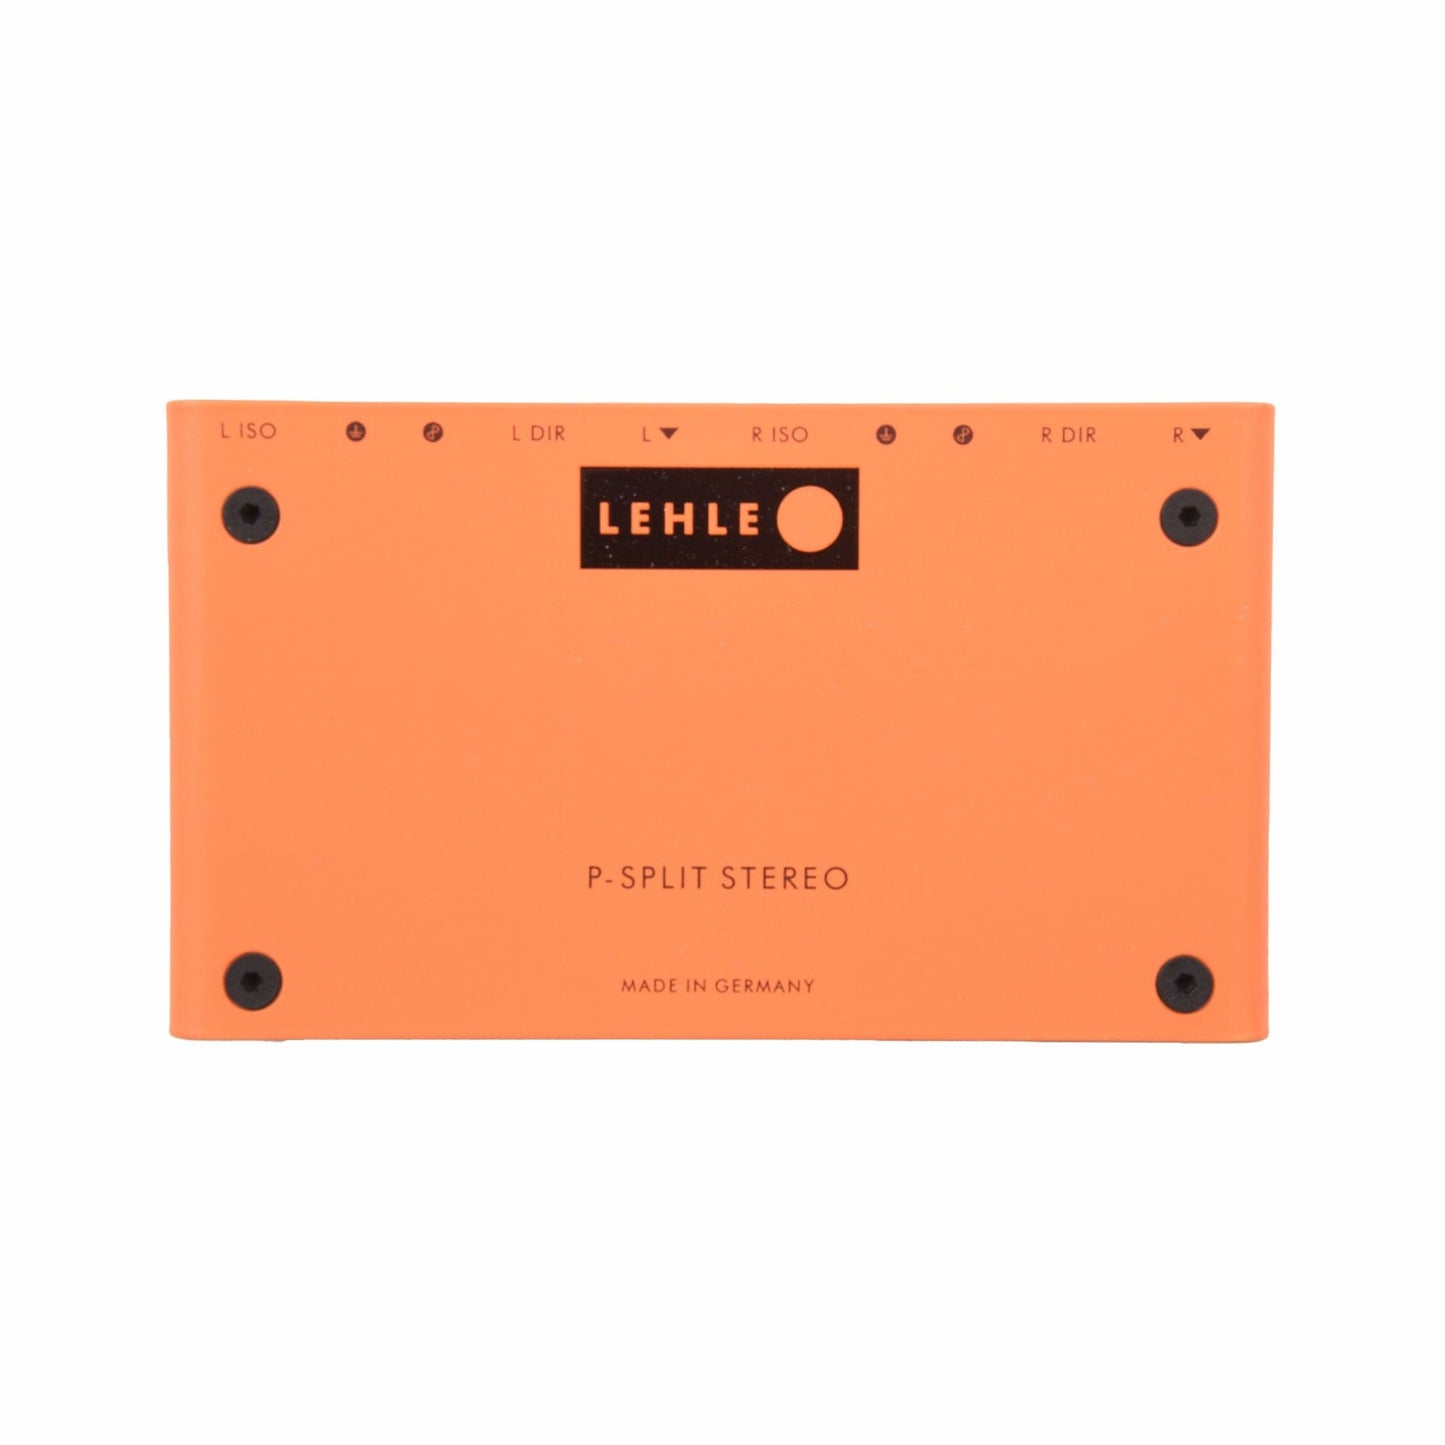 Lehle P-Split Stereo Signal Splitter Effects and Pedals / Controllers, Volume and Expression